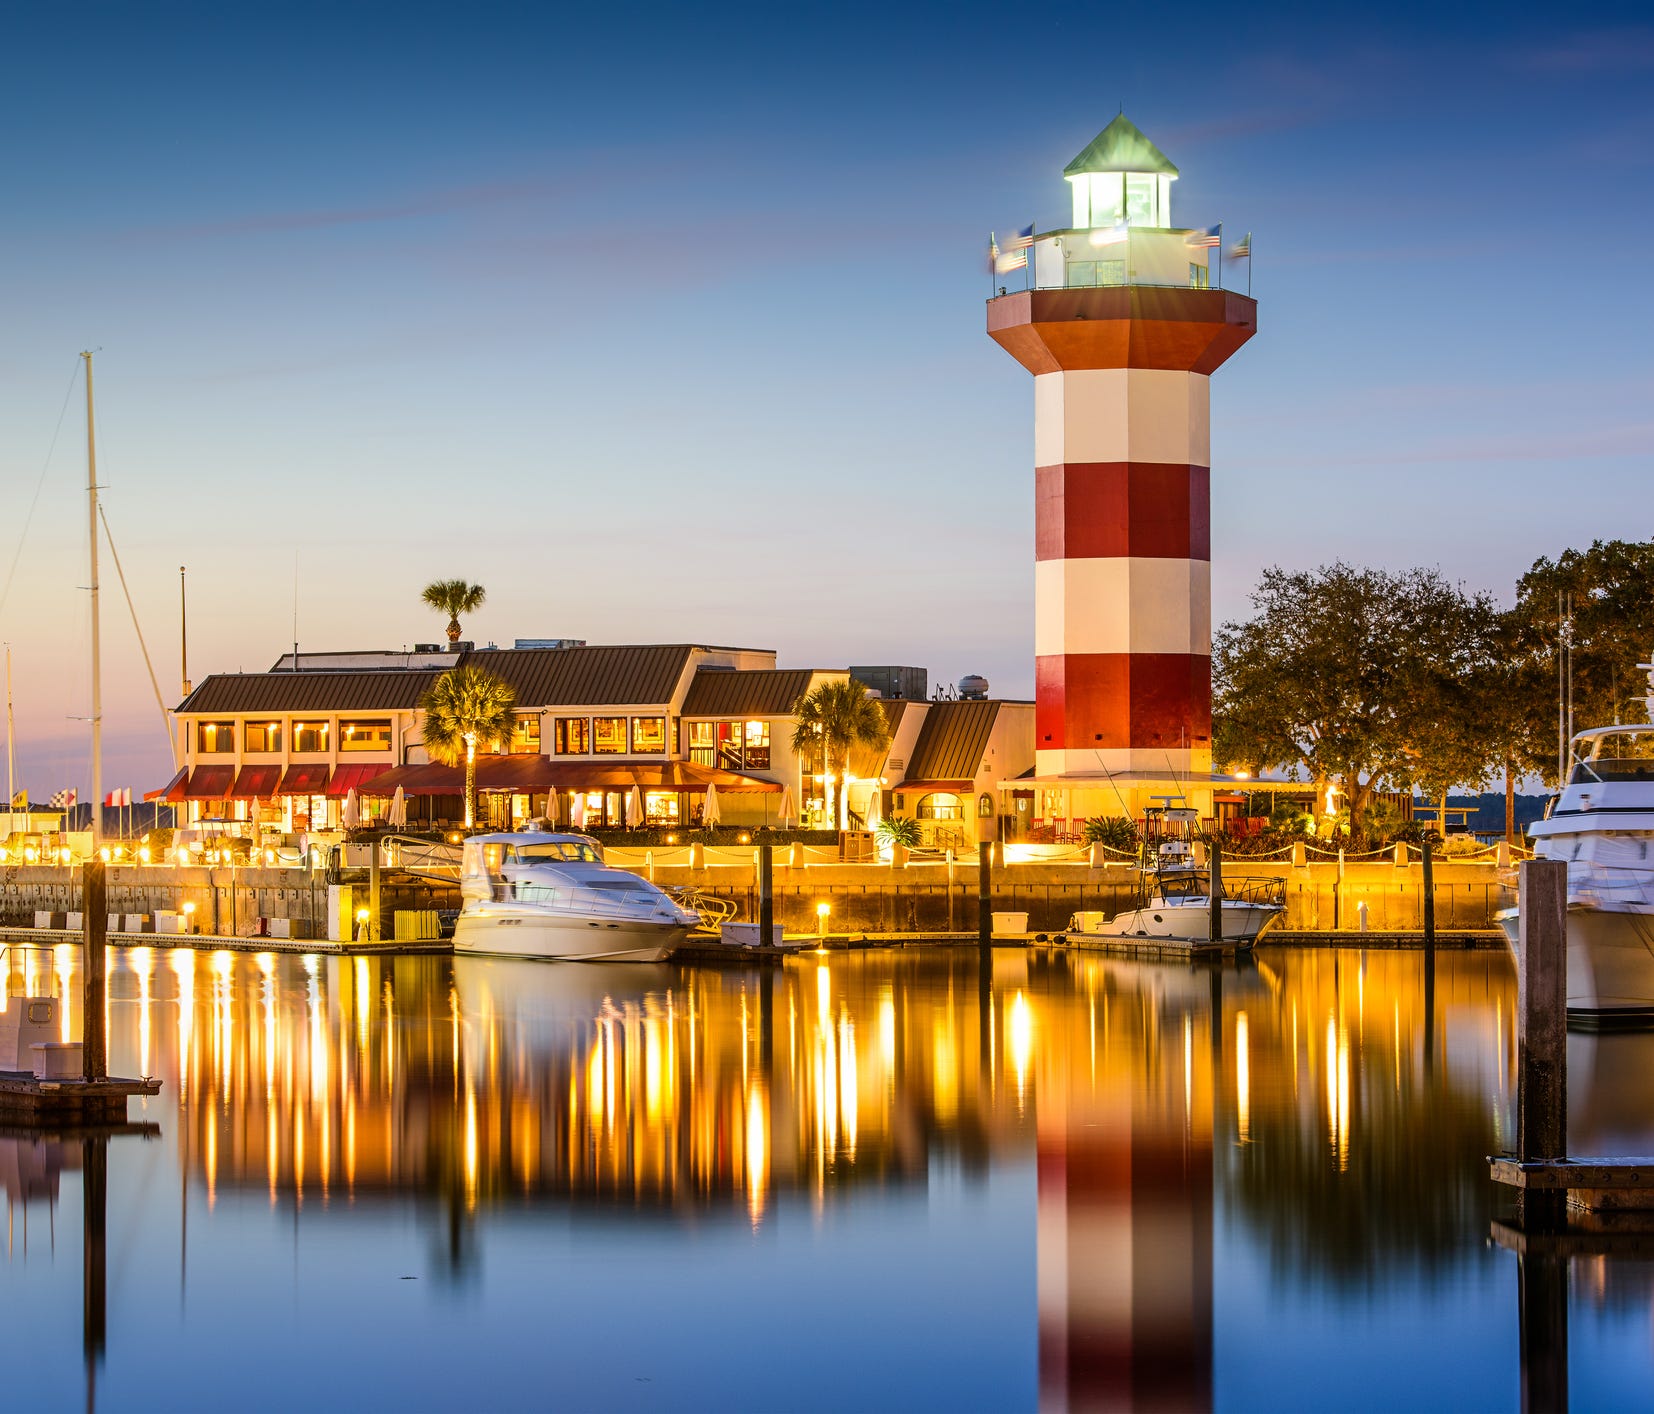 Hilton Head, S.C.: With hot weather and most kids back in school, Hilton Head is one of the best places to go for Labor Day for fewer crowds and better beach weather. Close out the summer with a day at Folly Beach or Coligny Beach, and then enjoy som